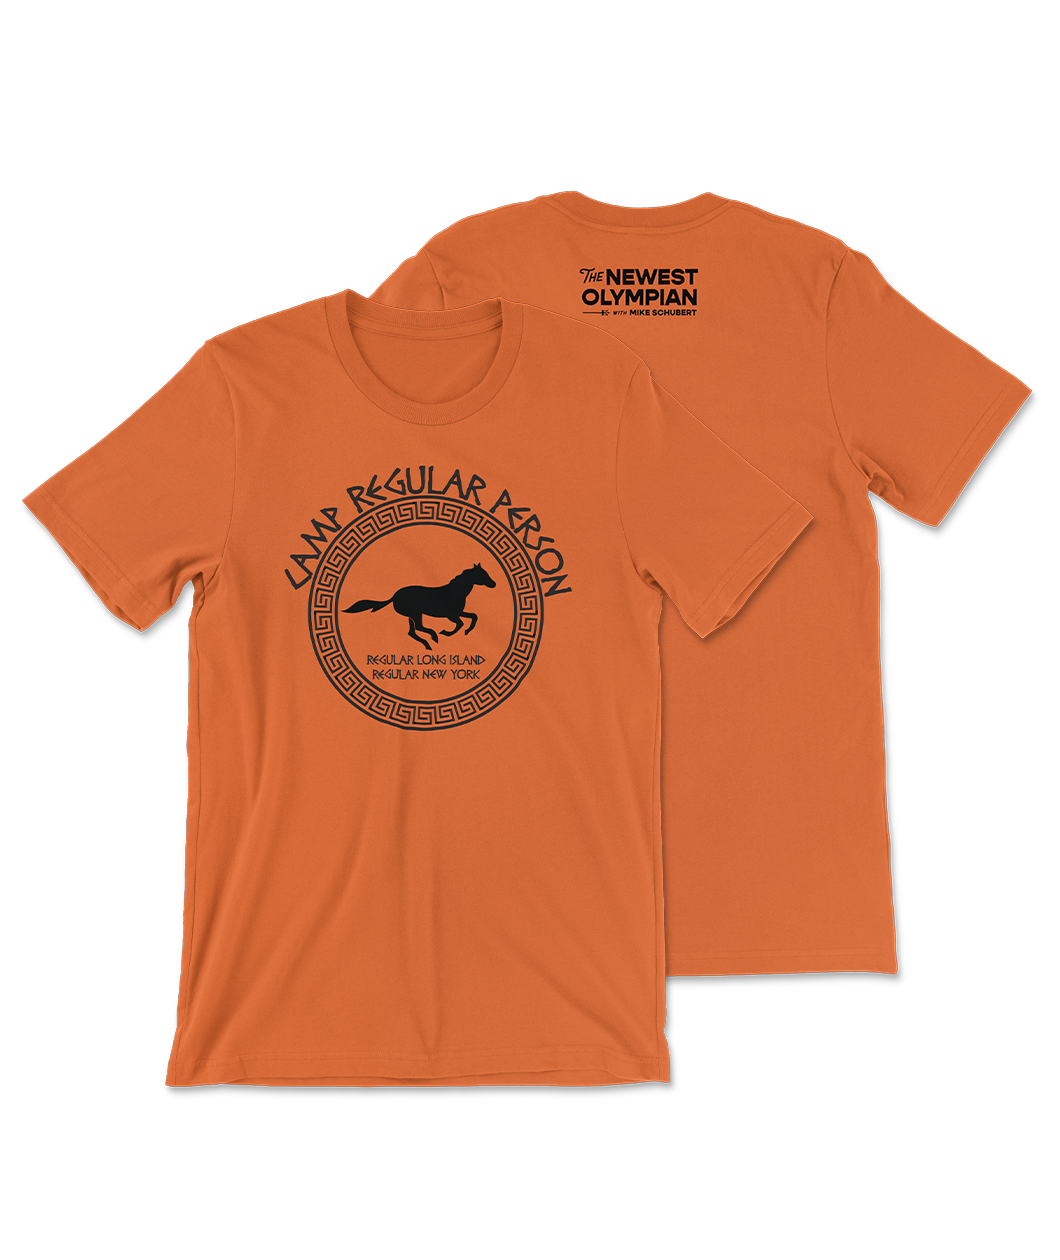 An orange t-shirt that has The Newest Olympian logo on the back neck area and a circular design on the front of a running horse with test that reads 